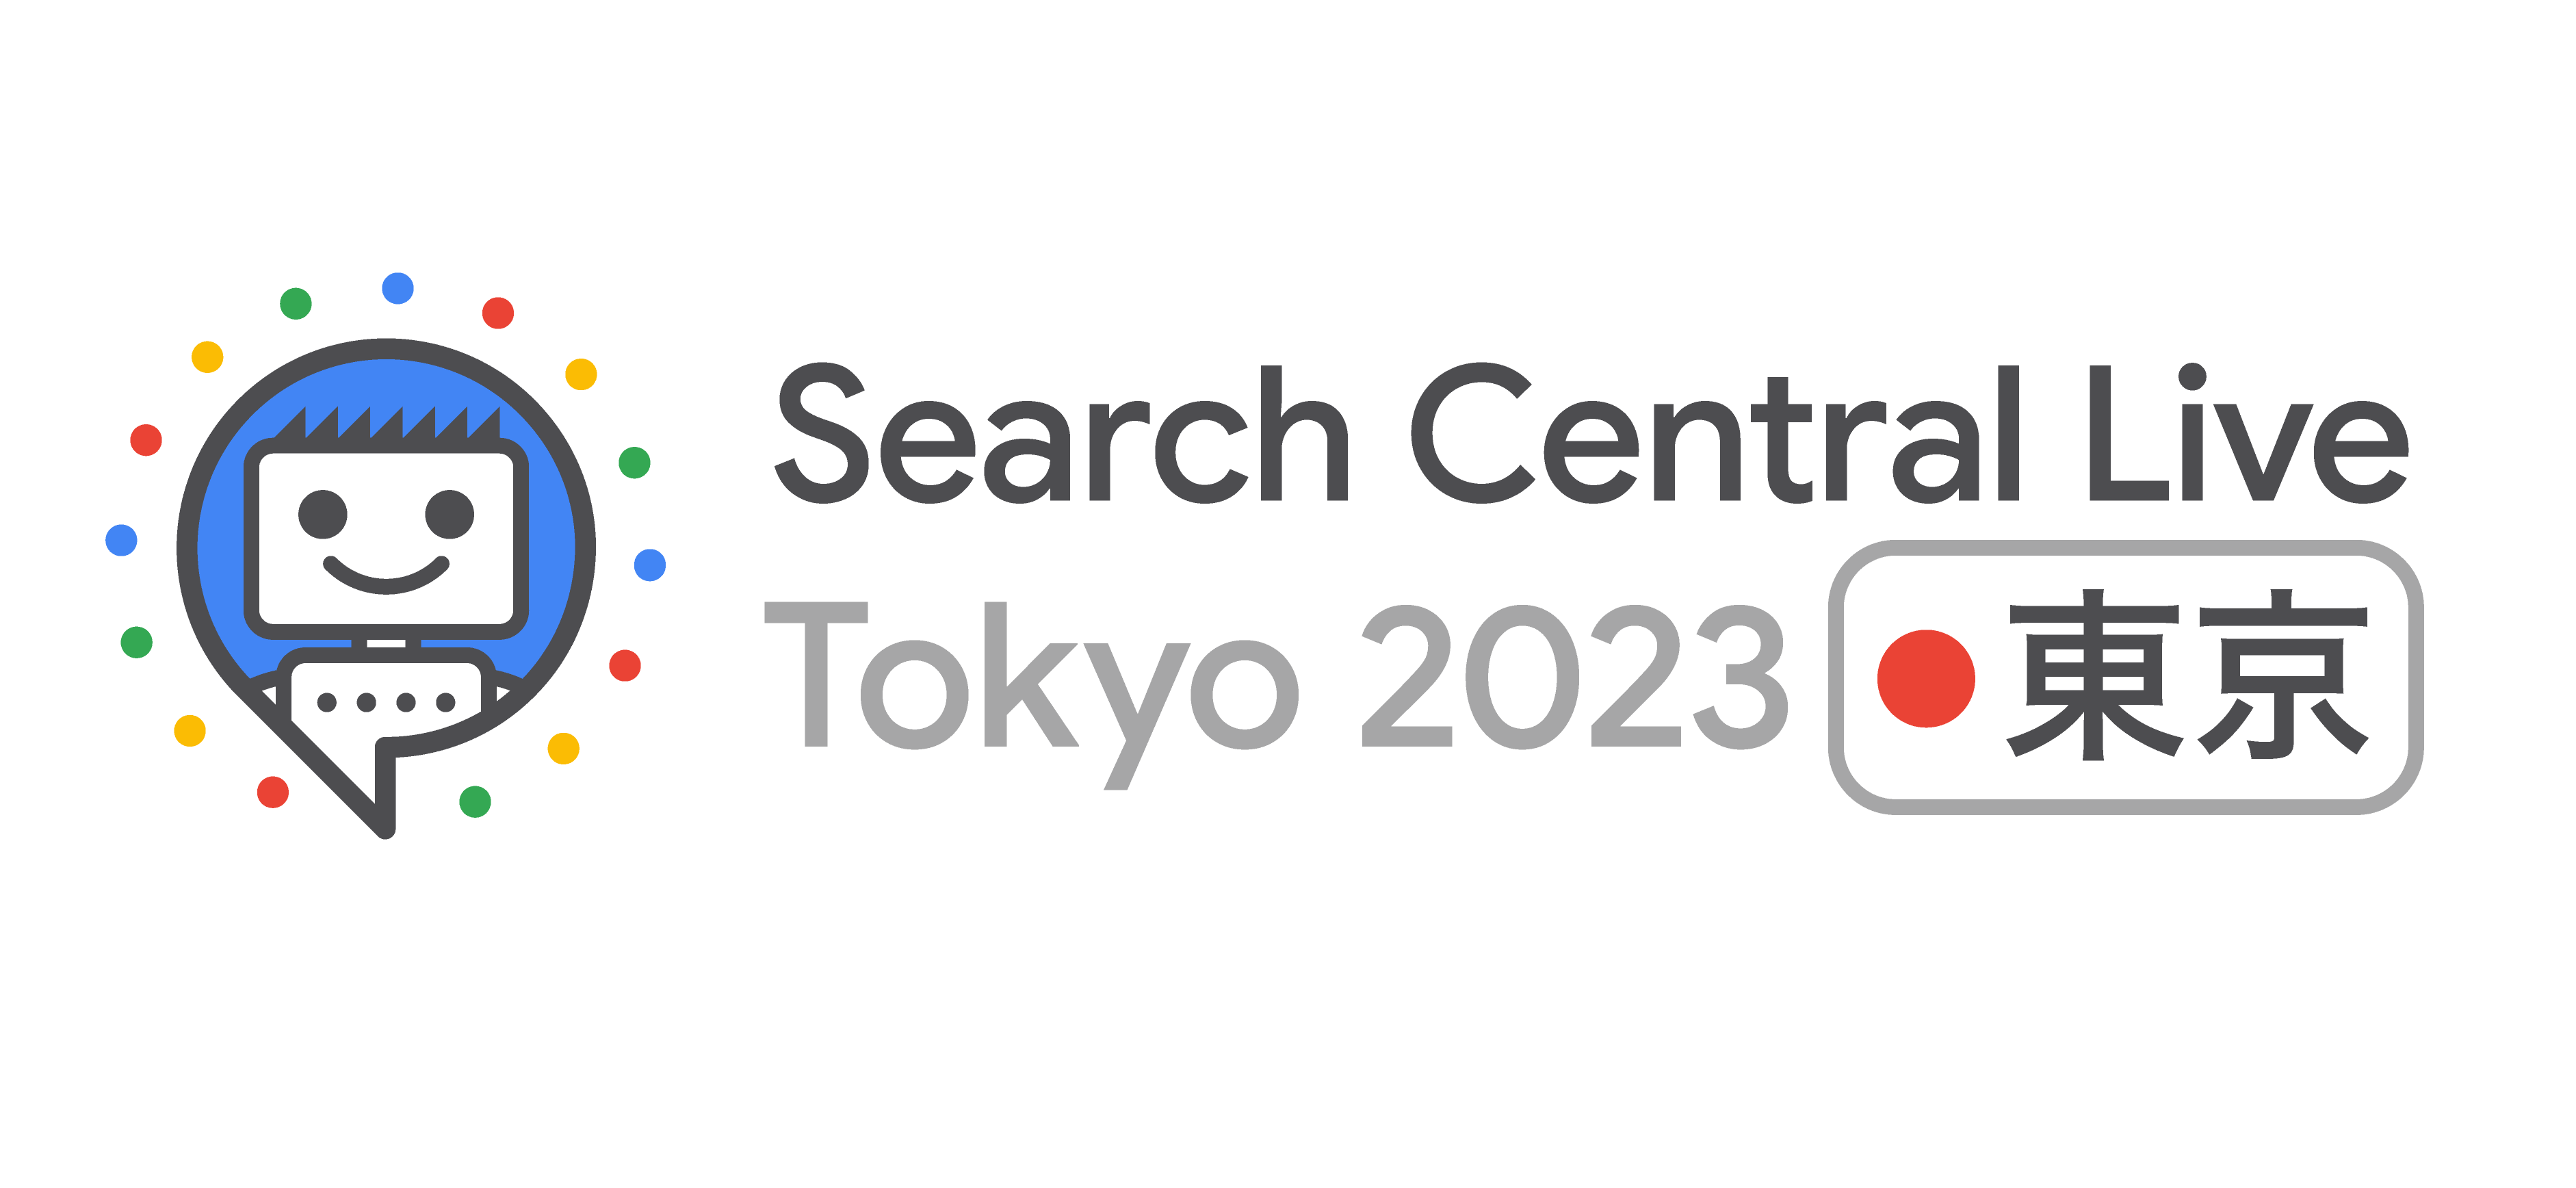 Search Central Live Tokyo 2023